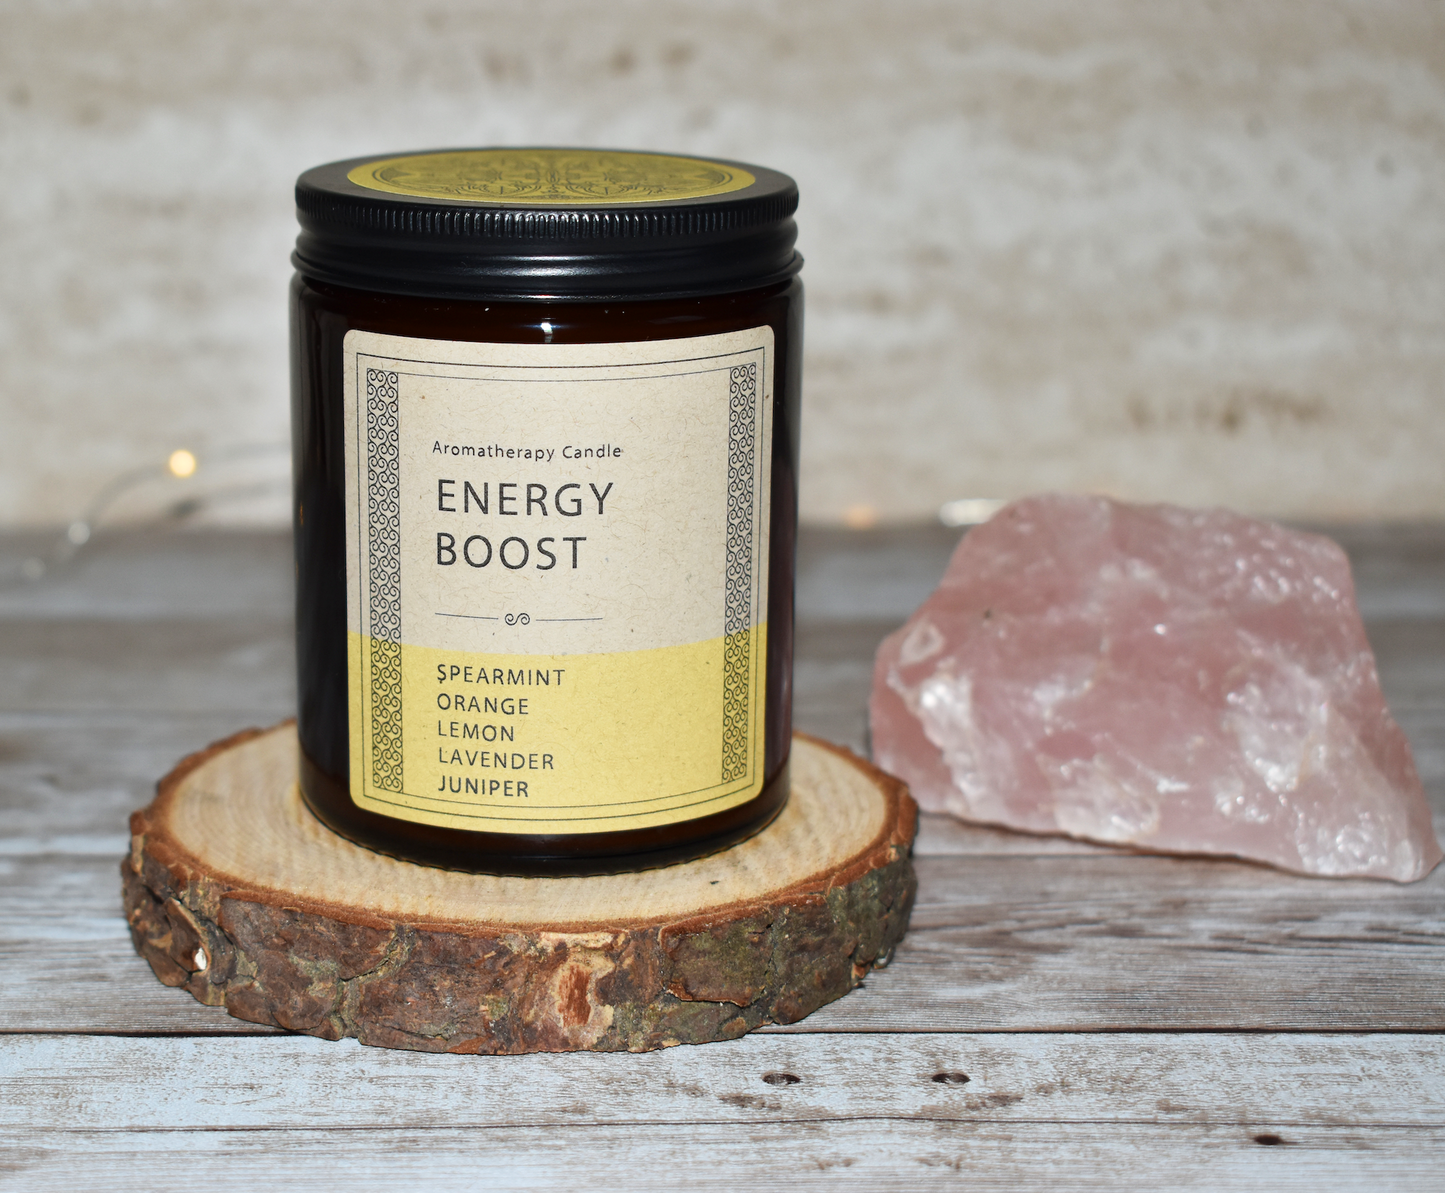 Elevate Your Mood with the "Energy Boost" Aromatherapy Candle: Spearmint, Orange, Lemon, Lavender, Juniper"